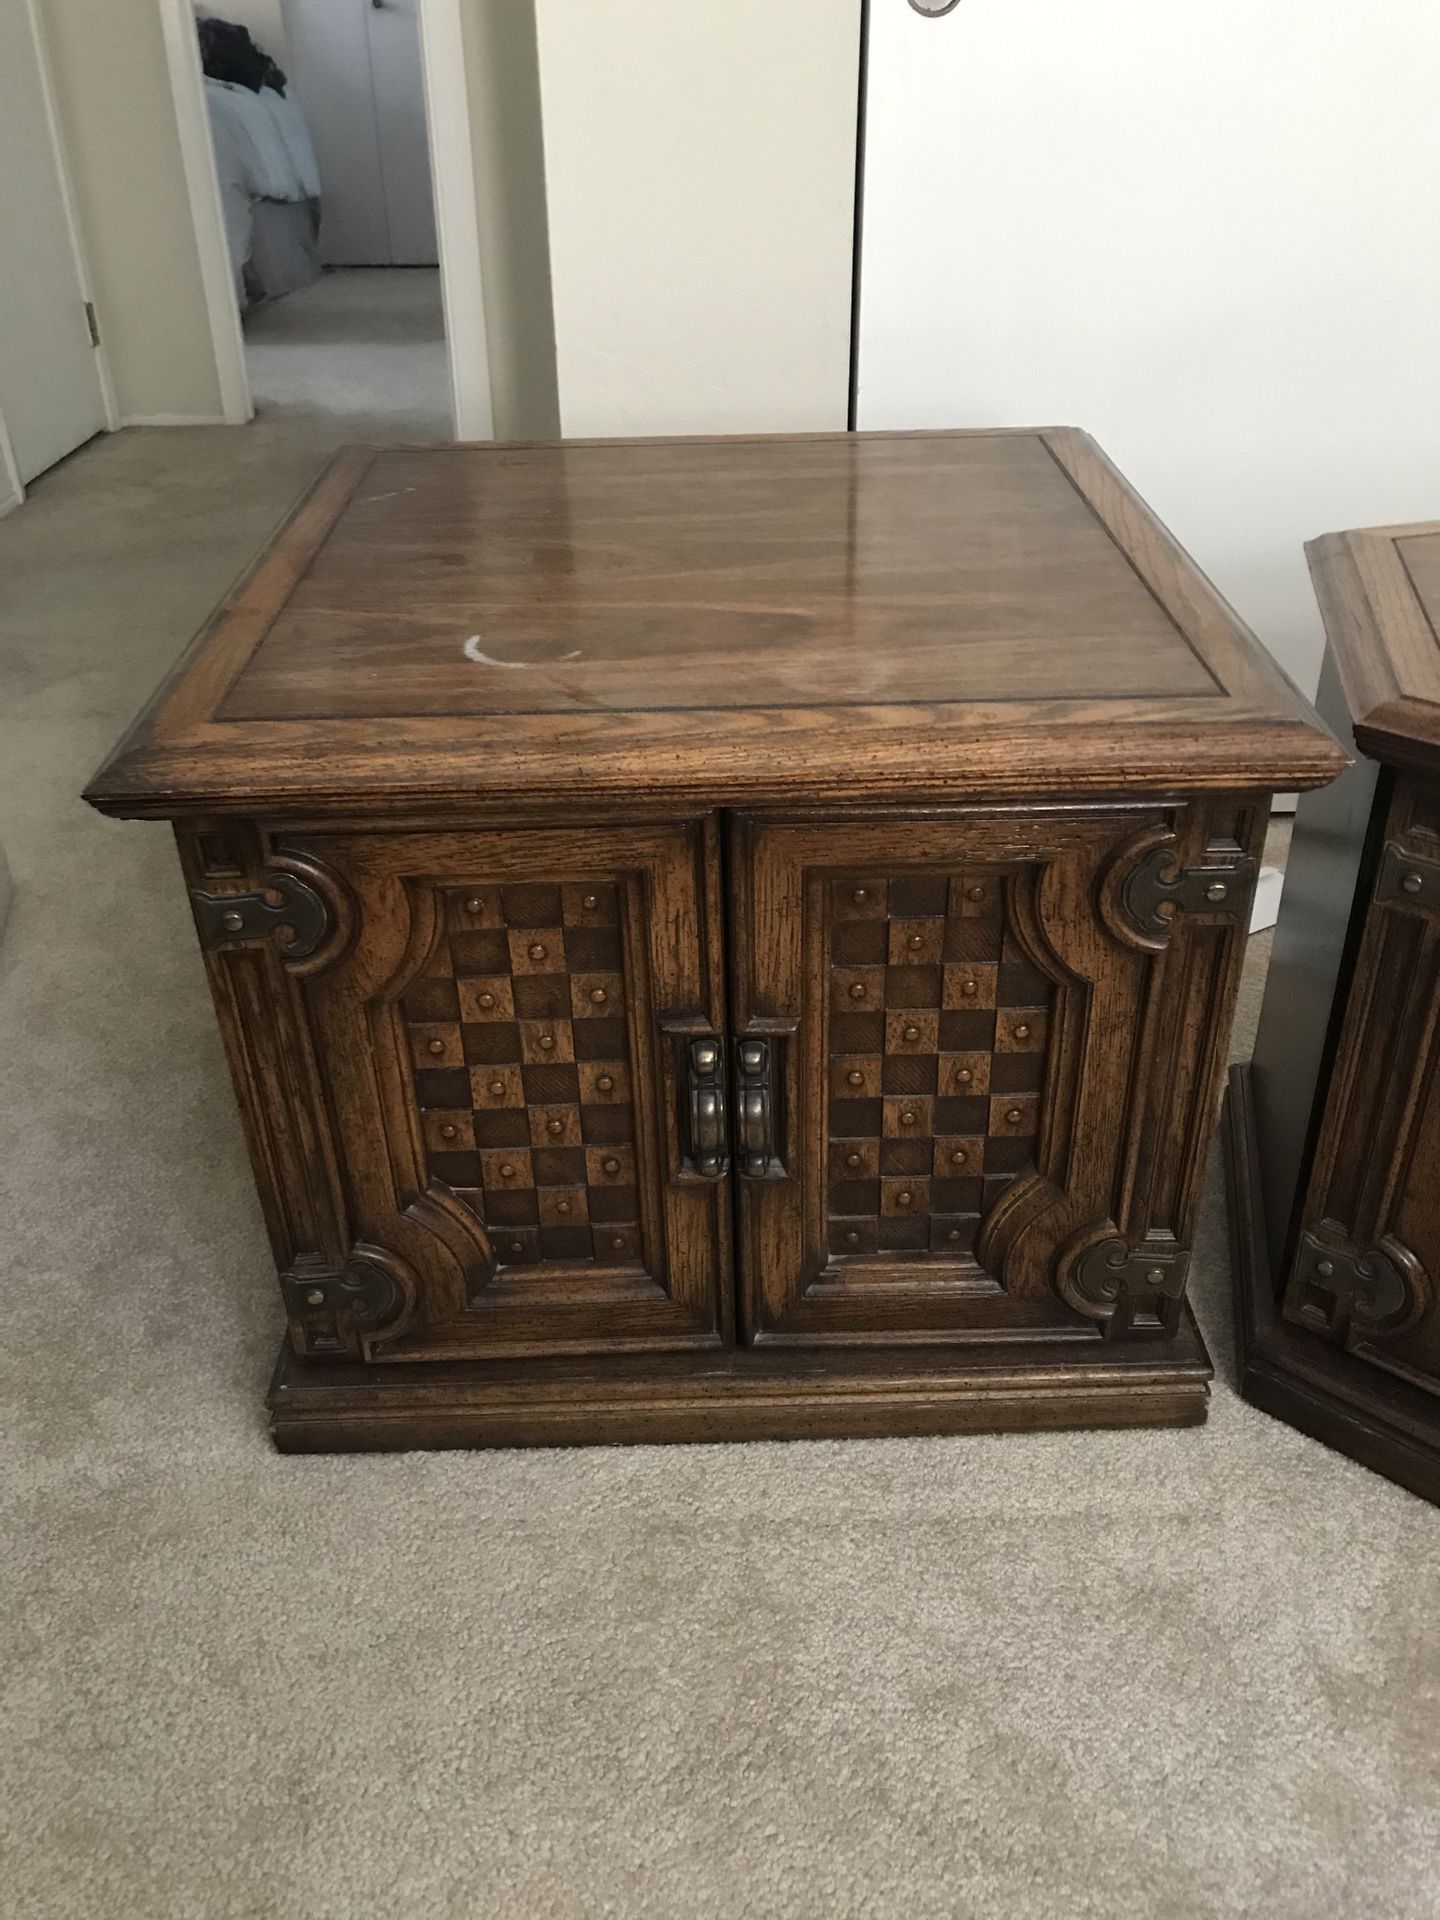 FREE- wooden square end table with cabinet storage